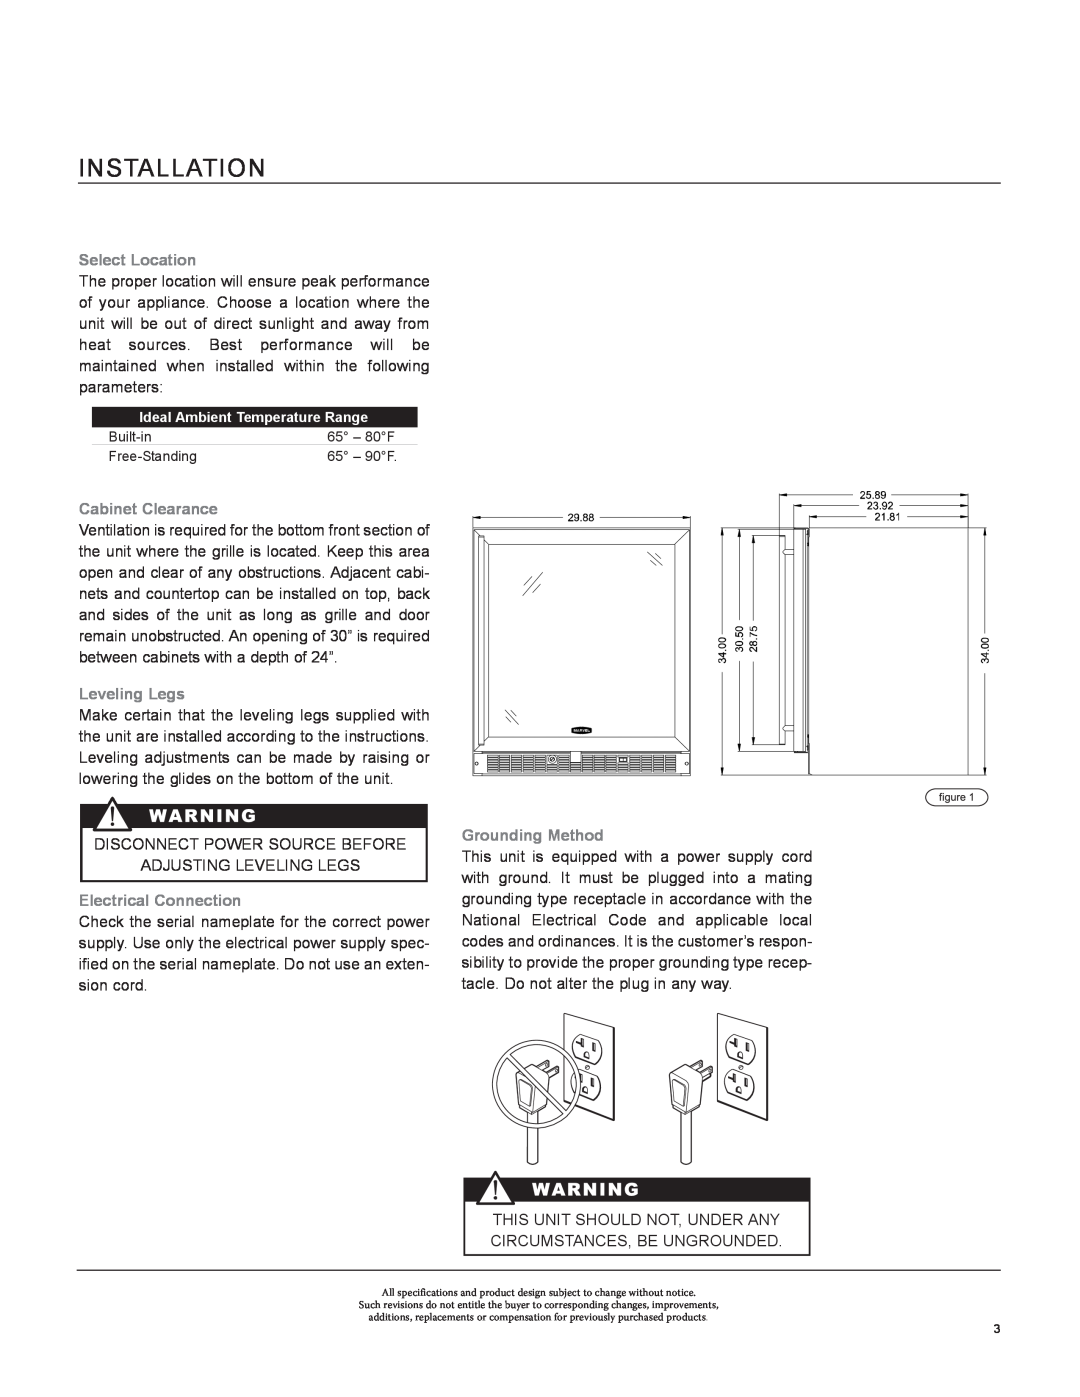 Marvel Industries 8SBAR manual Installation, Select Location, Cabinet Clearance, Leveling Legs, Electrical Connection 